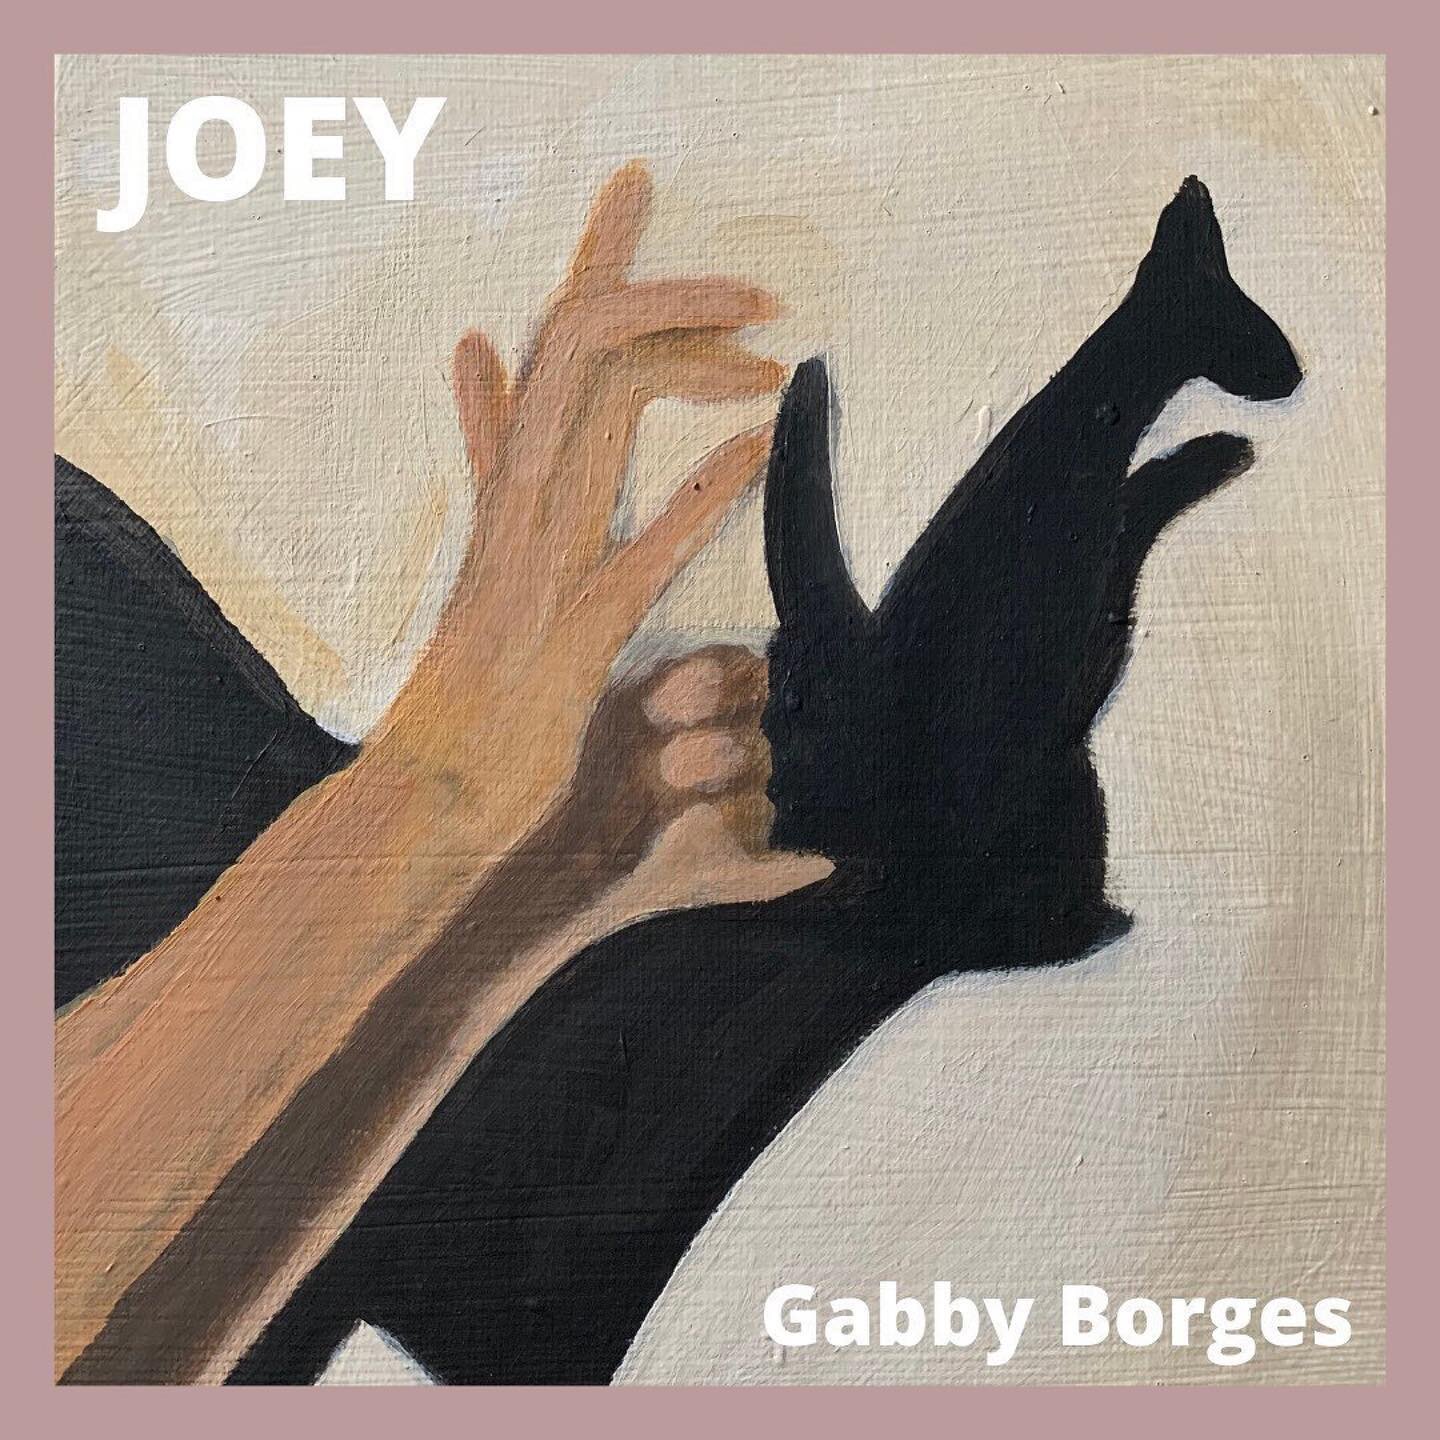 Hello friends! Take some time to check out this awesome collection of tunes by Gabby Borges @gerbygib and feed your ears with the sweet goodness. Gabby is super awesome and we had a blast putting this together over the last few months, she and her ba